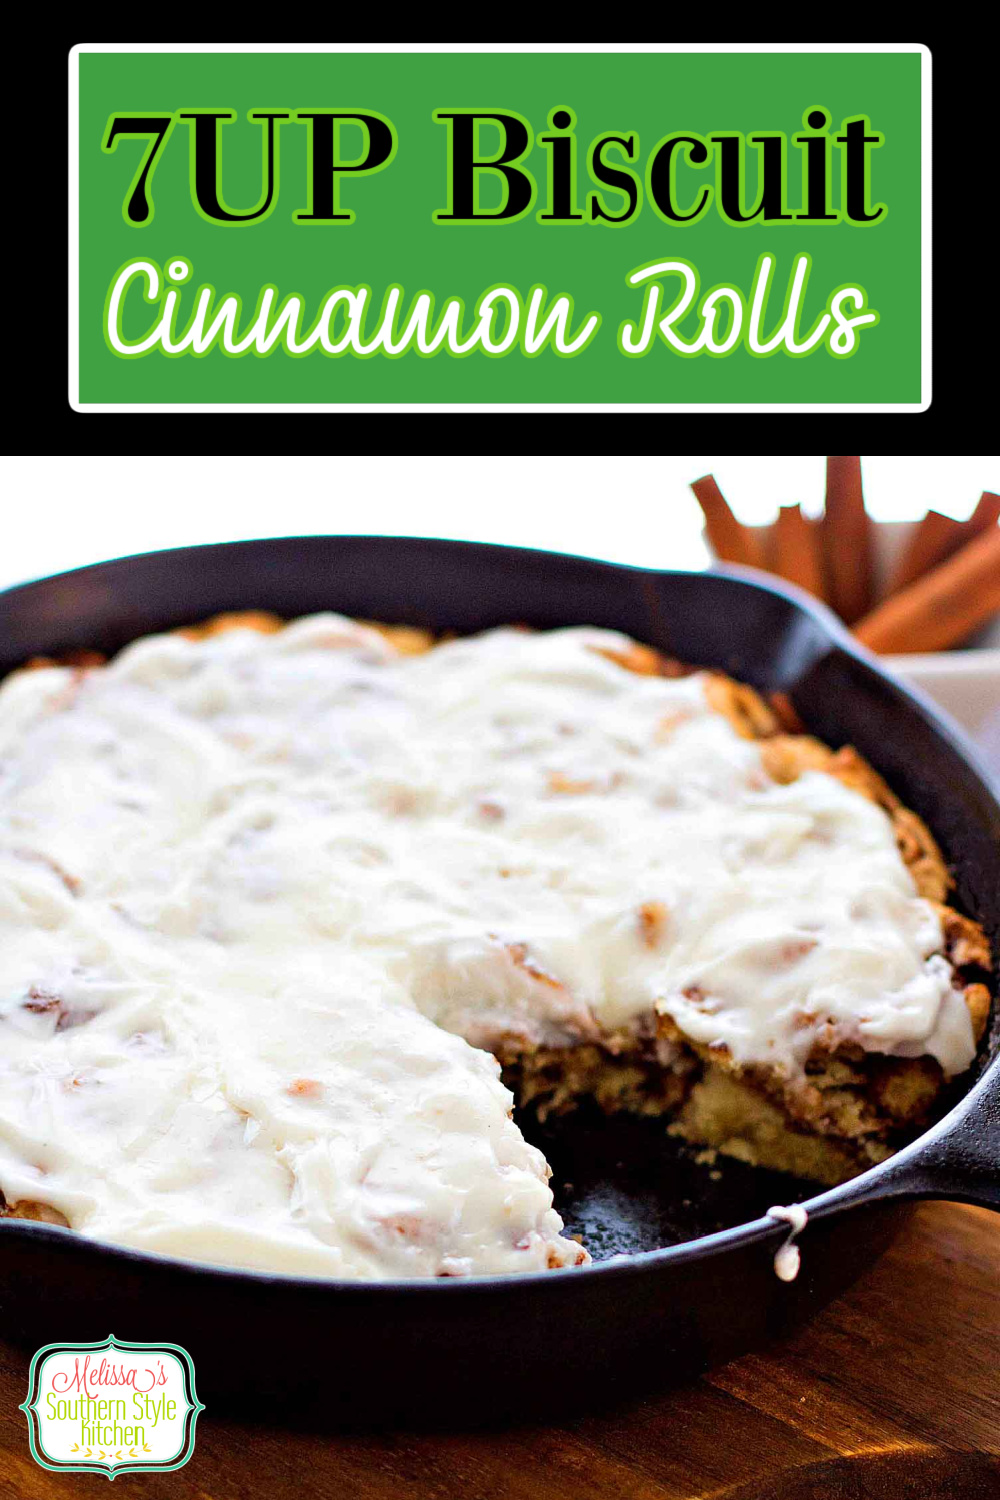 No one will ever guess the secret ingredient in these light and fluffy biscuit cinnamon rolls #cinnamonrolls #7UP #biscuits #brunch #breakfastrecipes #southernbiscuits #cinnamonbiscuits #7upcinnamonrolls #holidaybaking #holidaybrunch #southernfood #southernrecipes